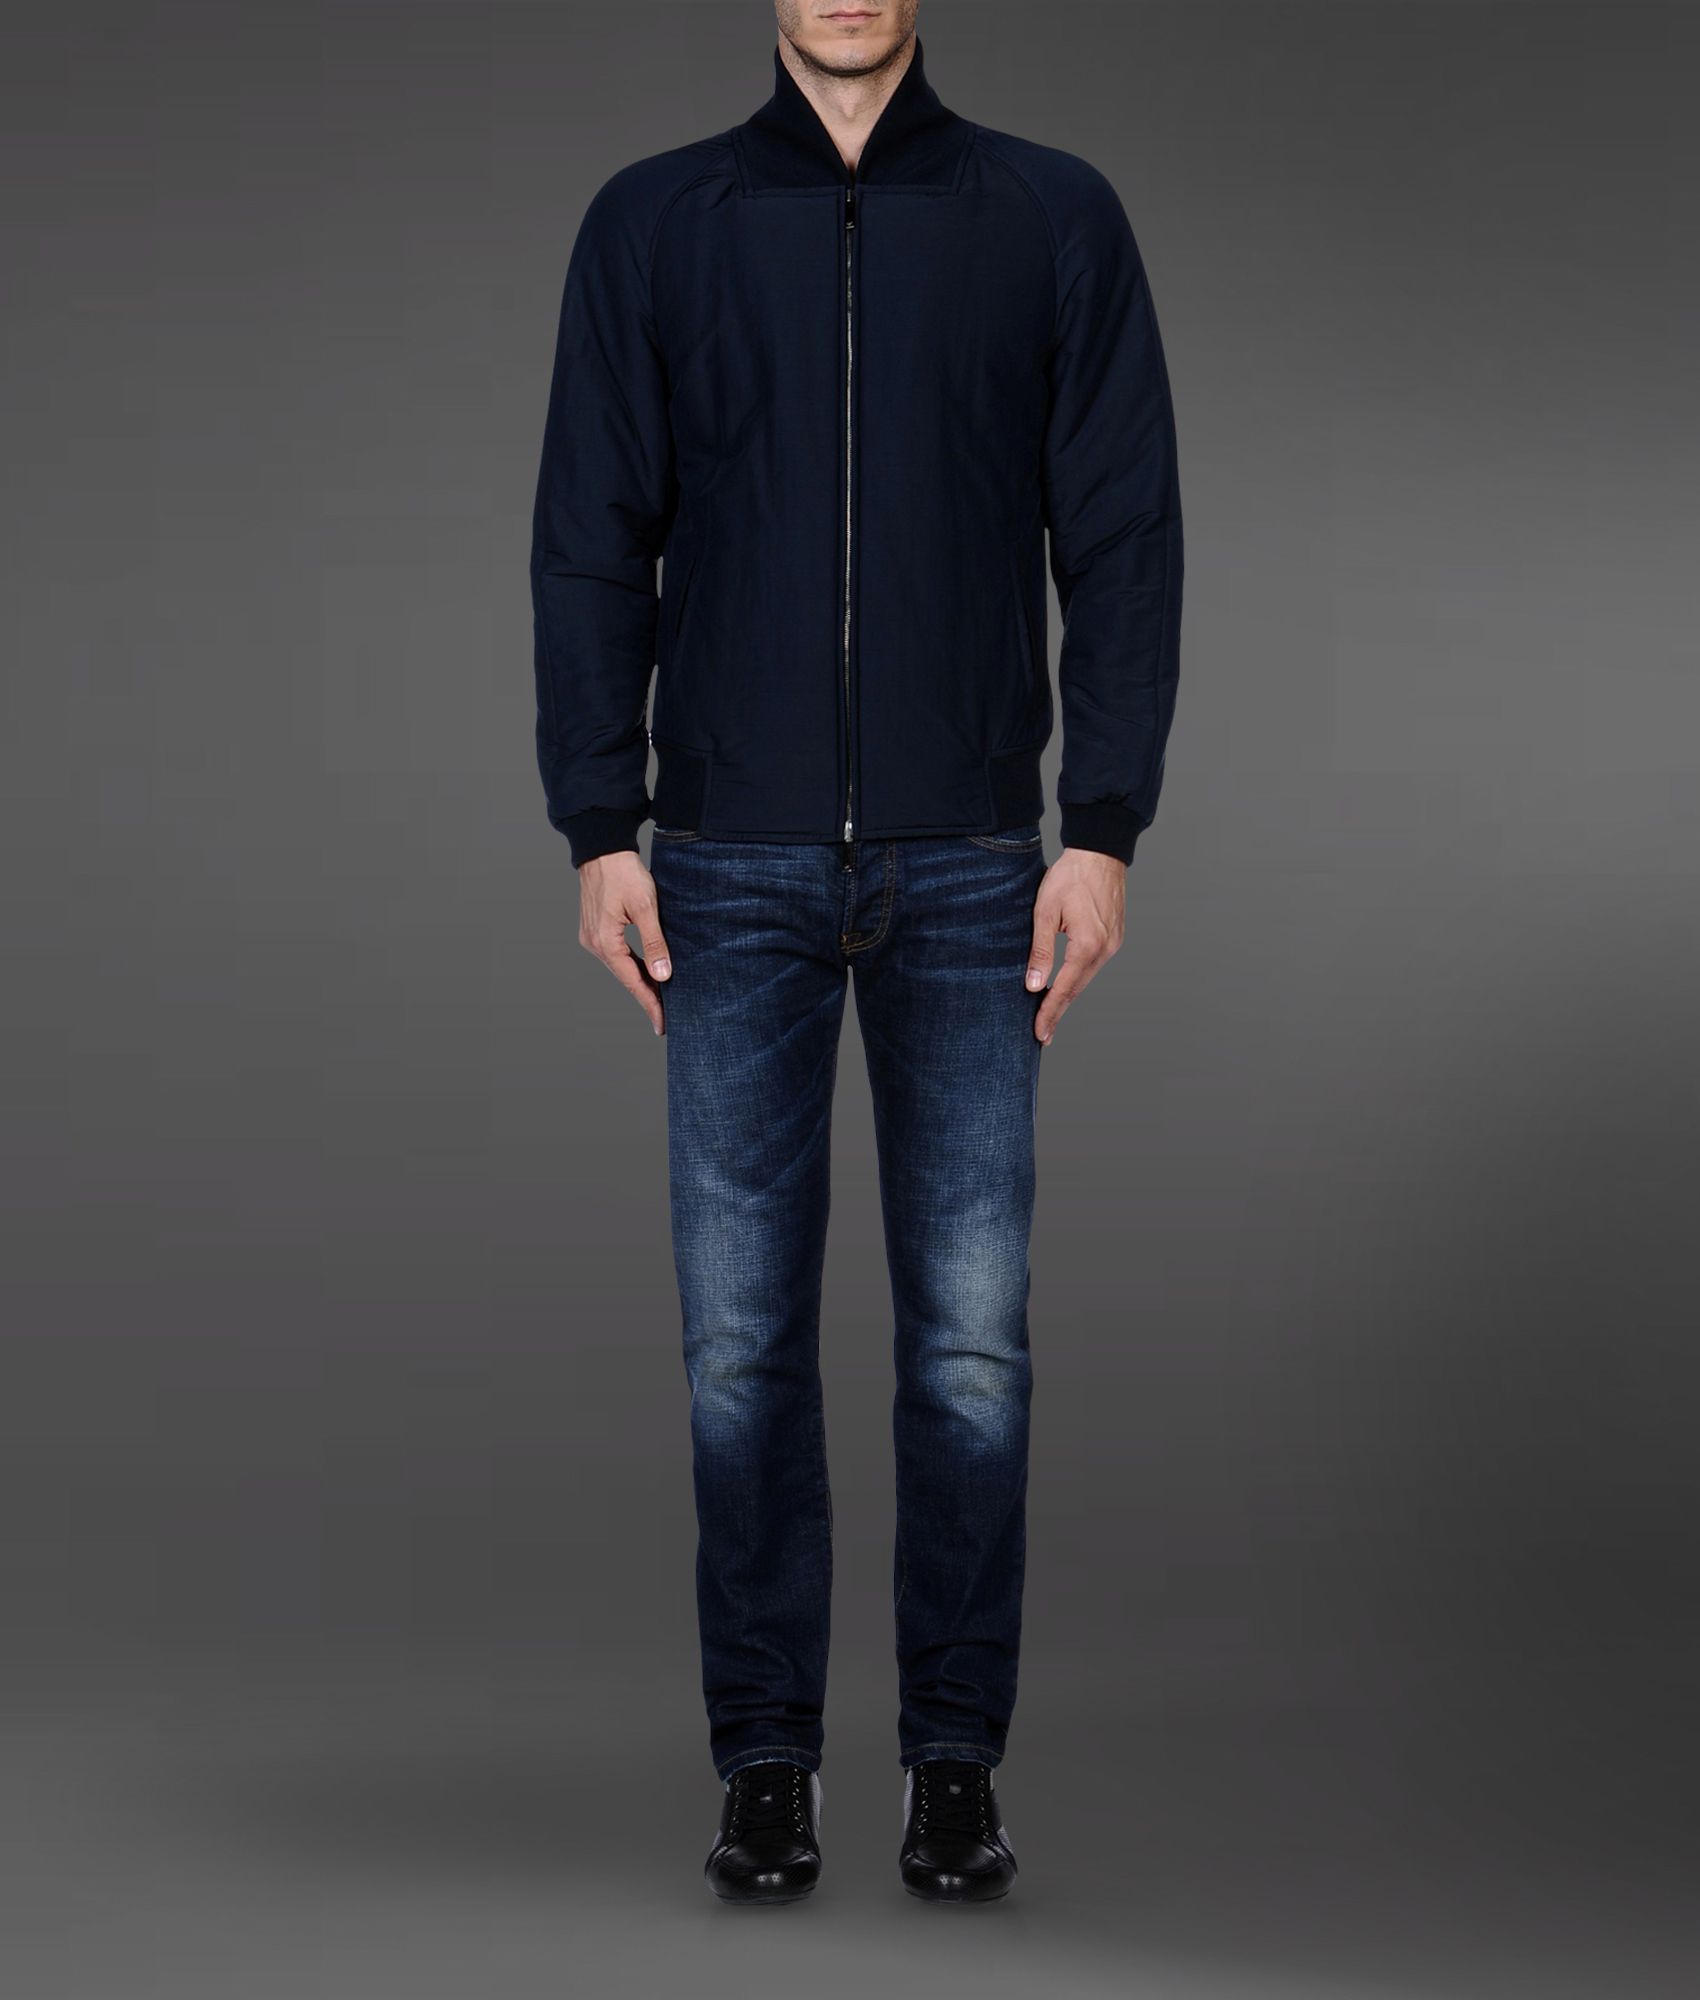 Lyst - Emporio Armani Bomber Jacket in Blue for Men